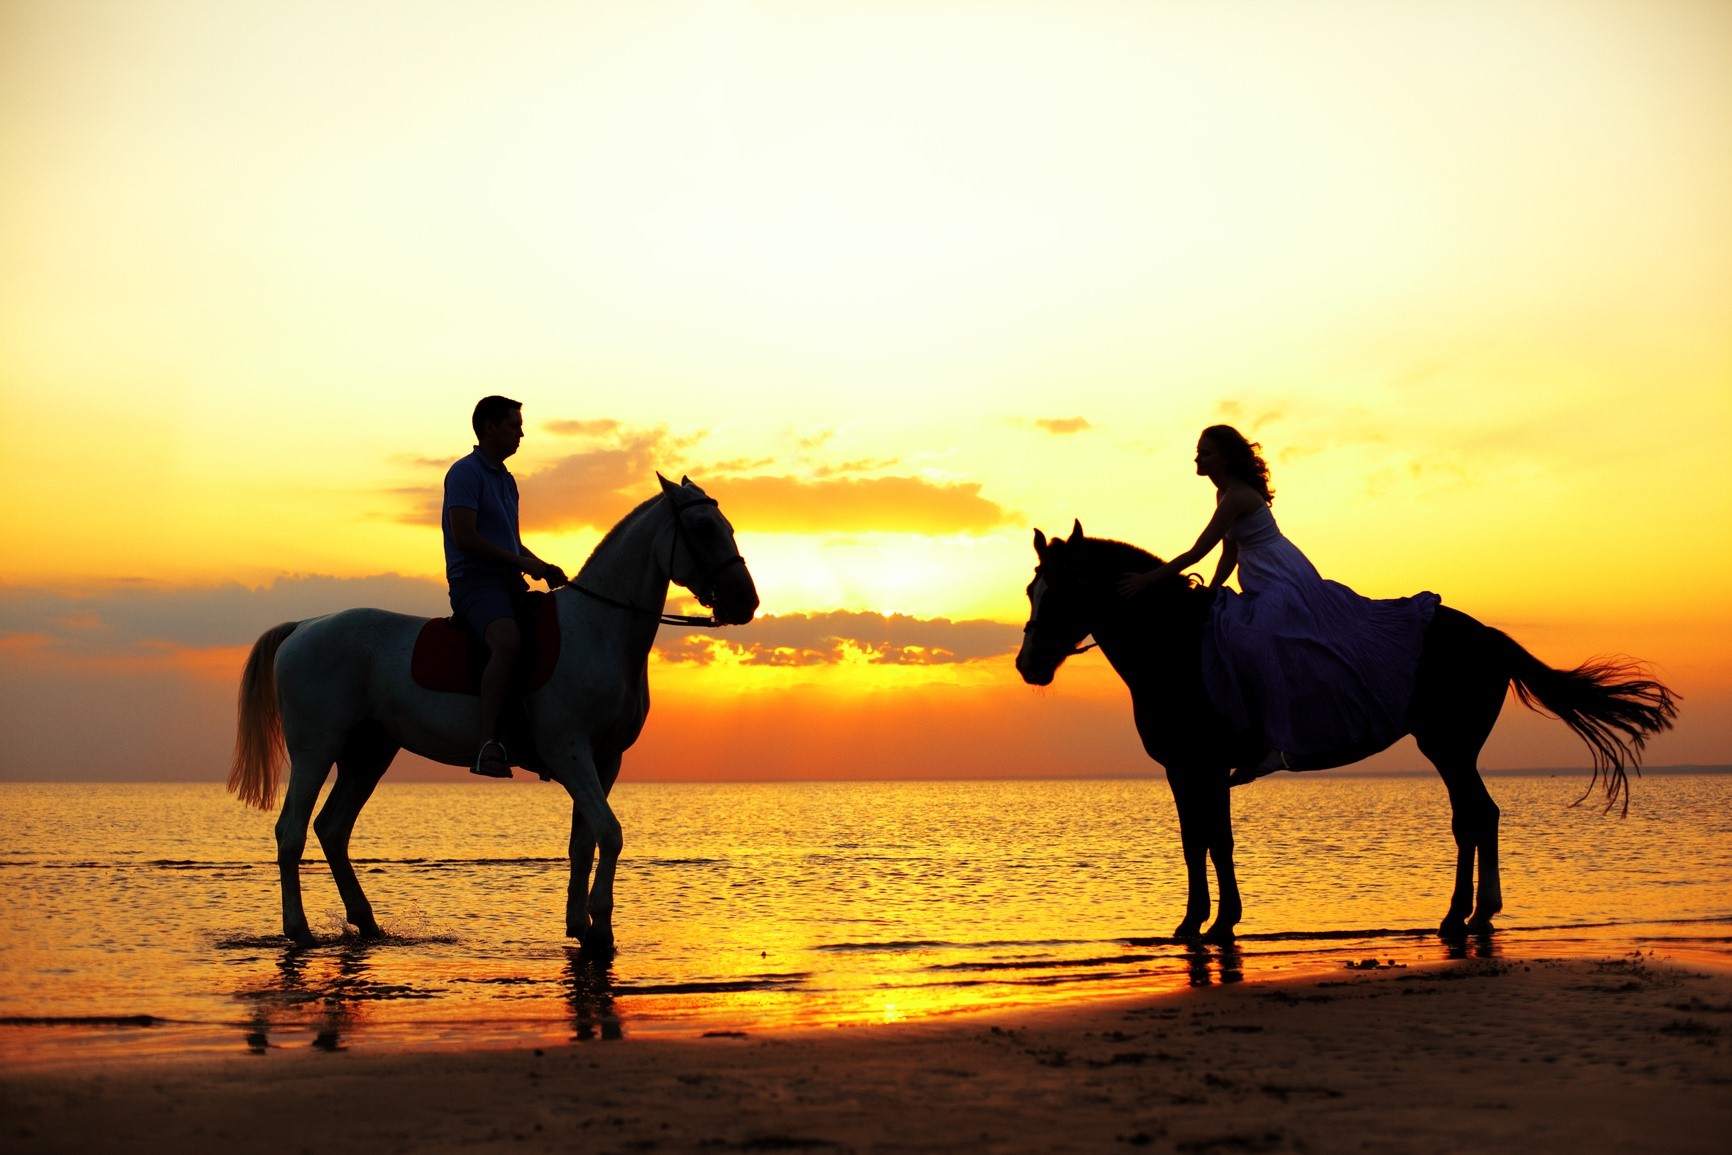 Horseback Riding - Two riders on horseback at sunset on the beach. Lovers ride horse